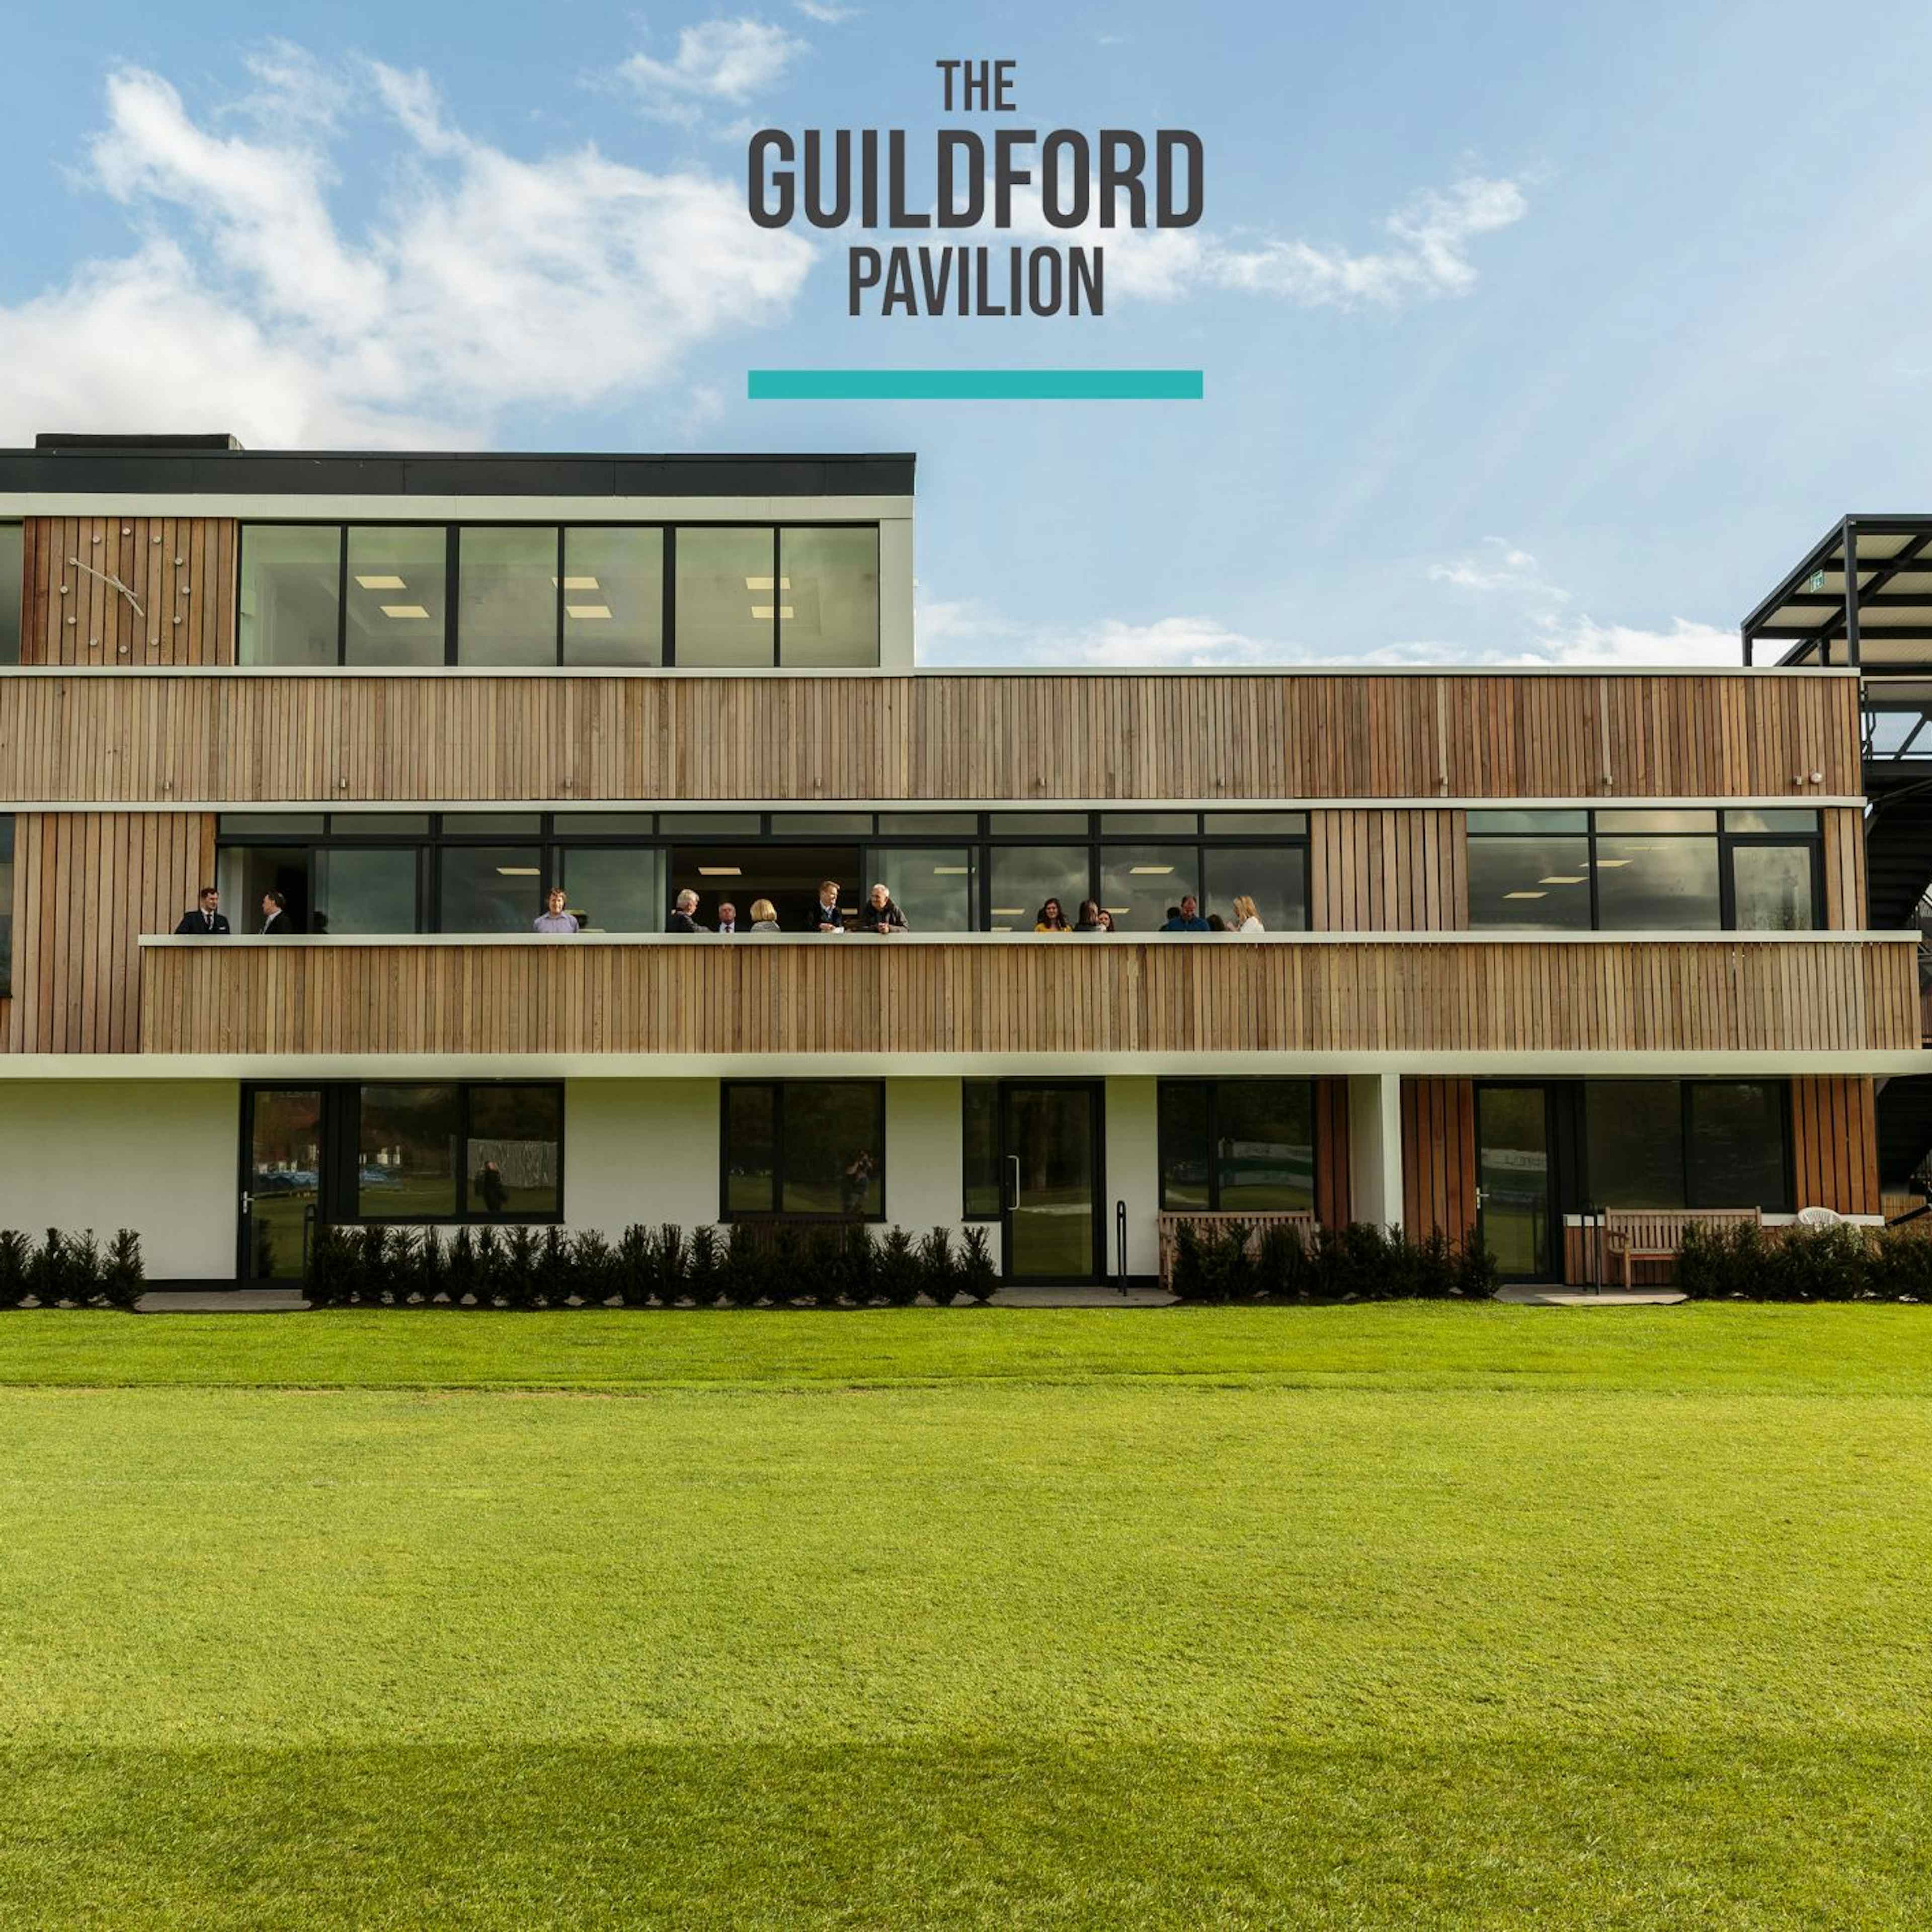 The Guildford Pavilion - The Long Room image 3